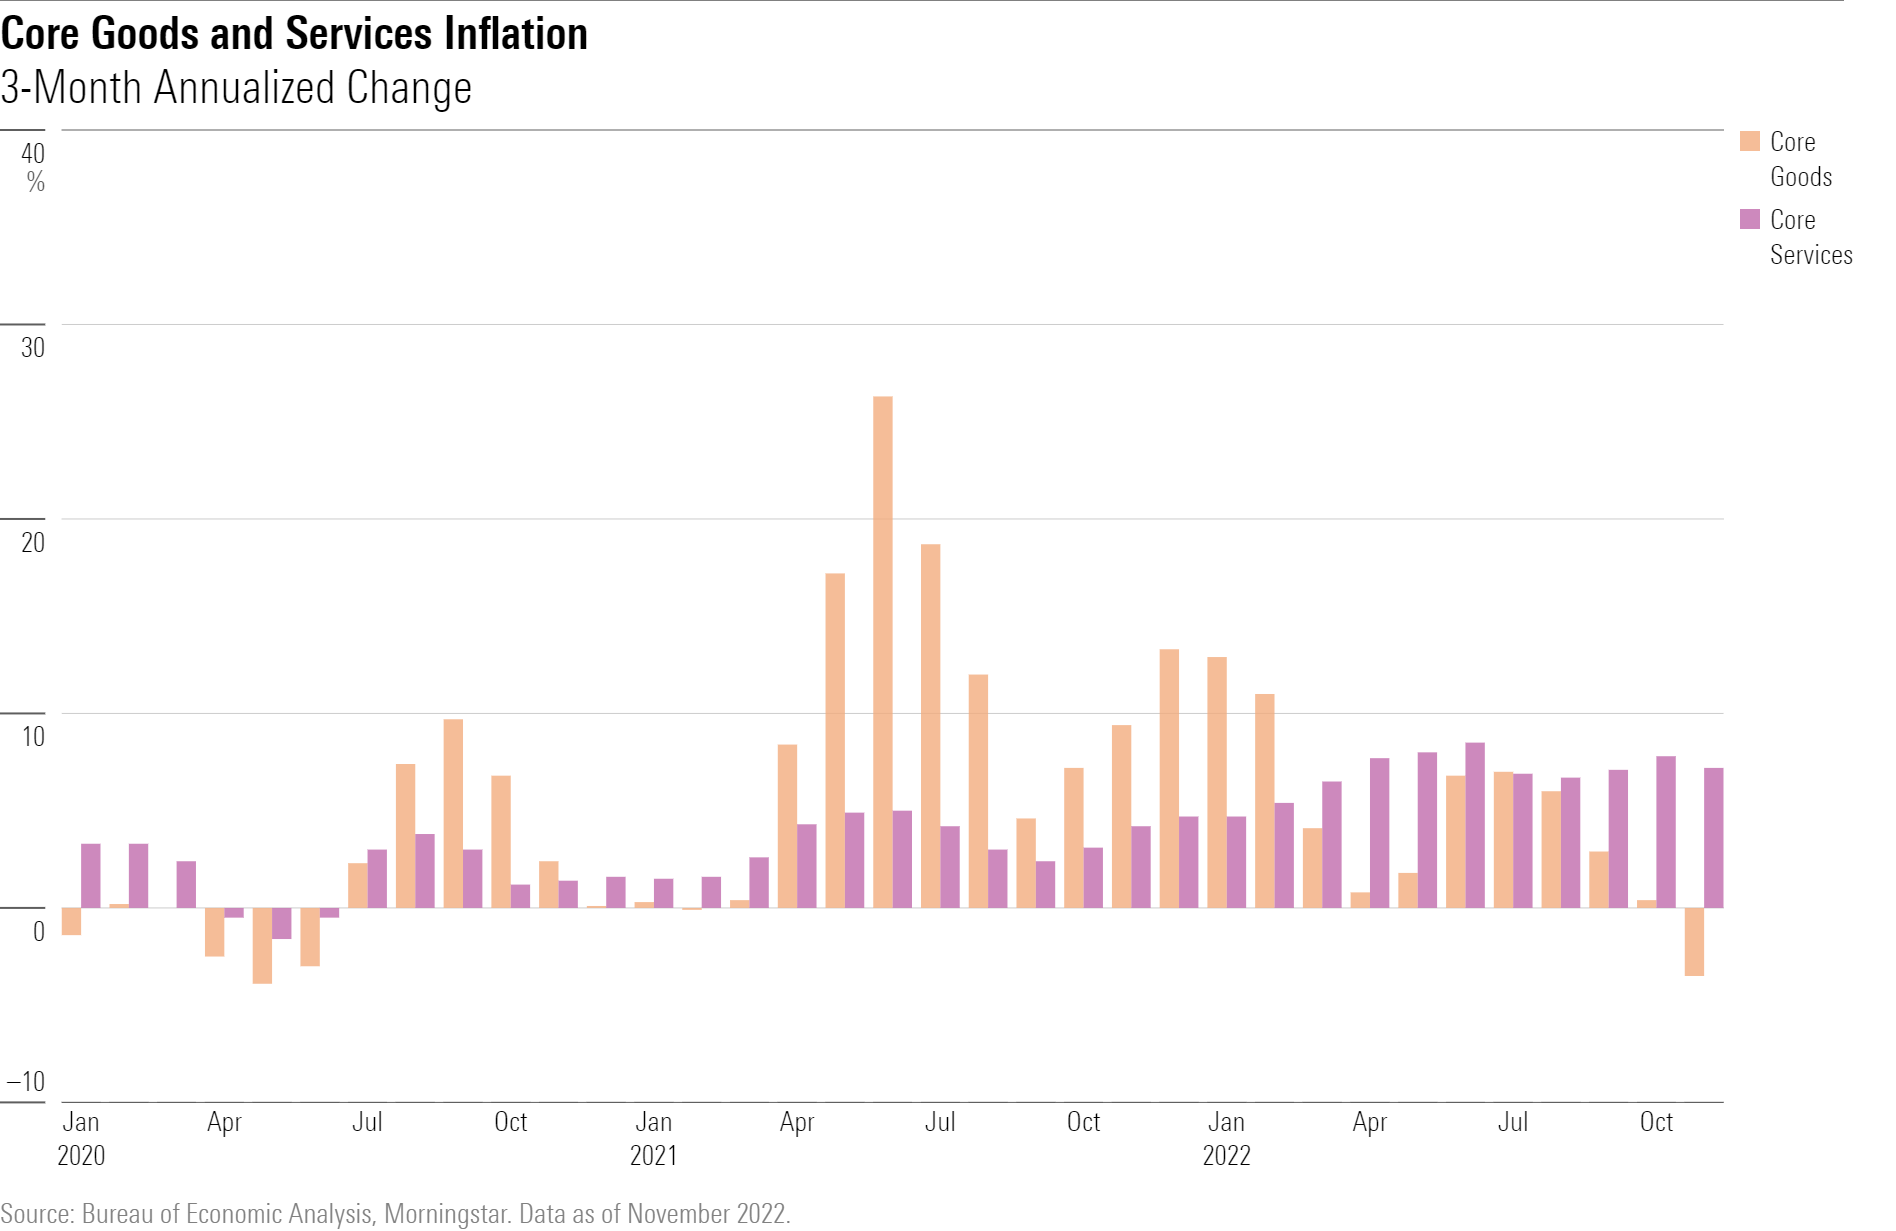 3-Month annualized changes in core goods vs. services inflation since 2020.